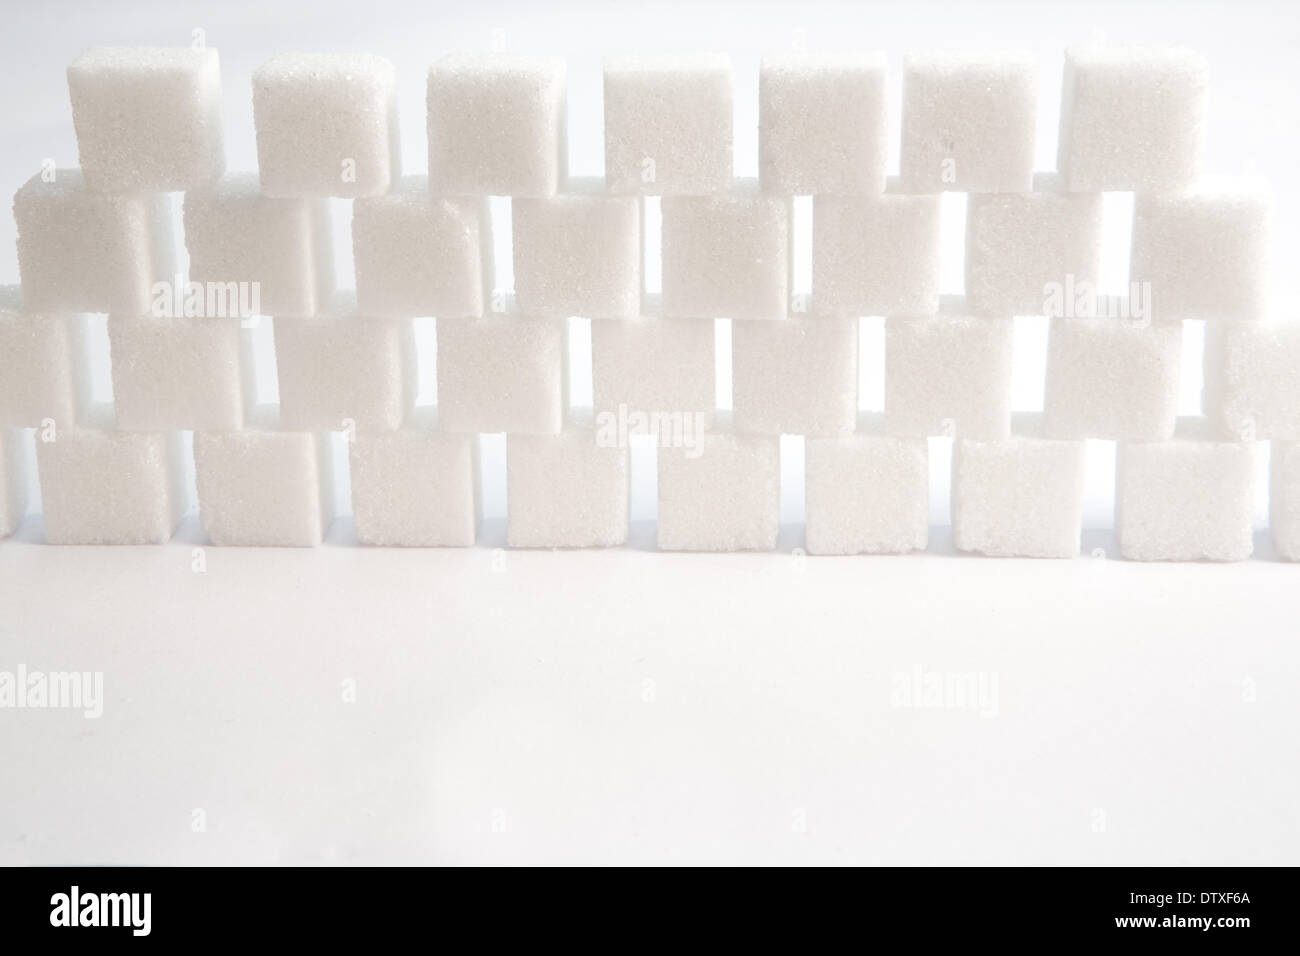 Sugar lumps piled up together Stock Photo - Alamy